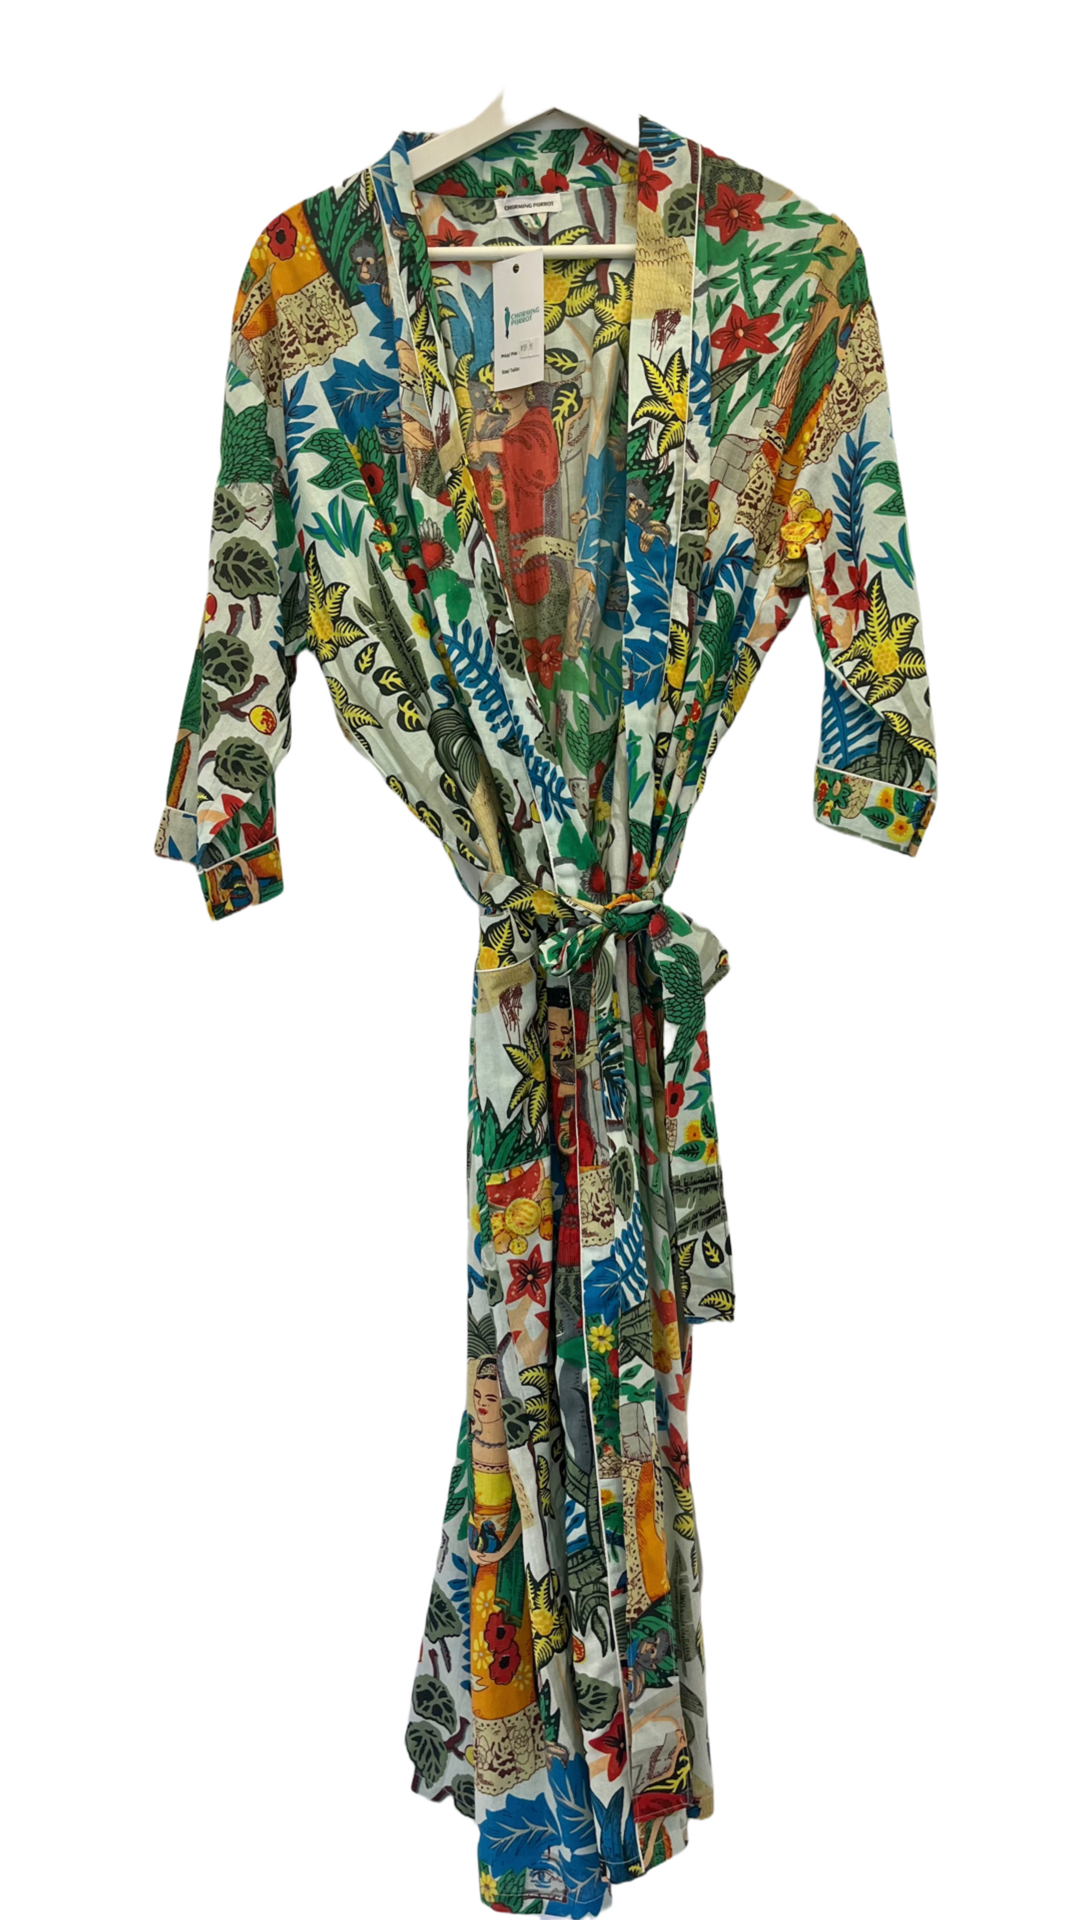 Lana 100% Cotton Robe with Pockets and waist tie